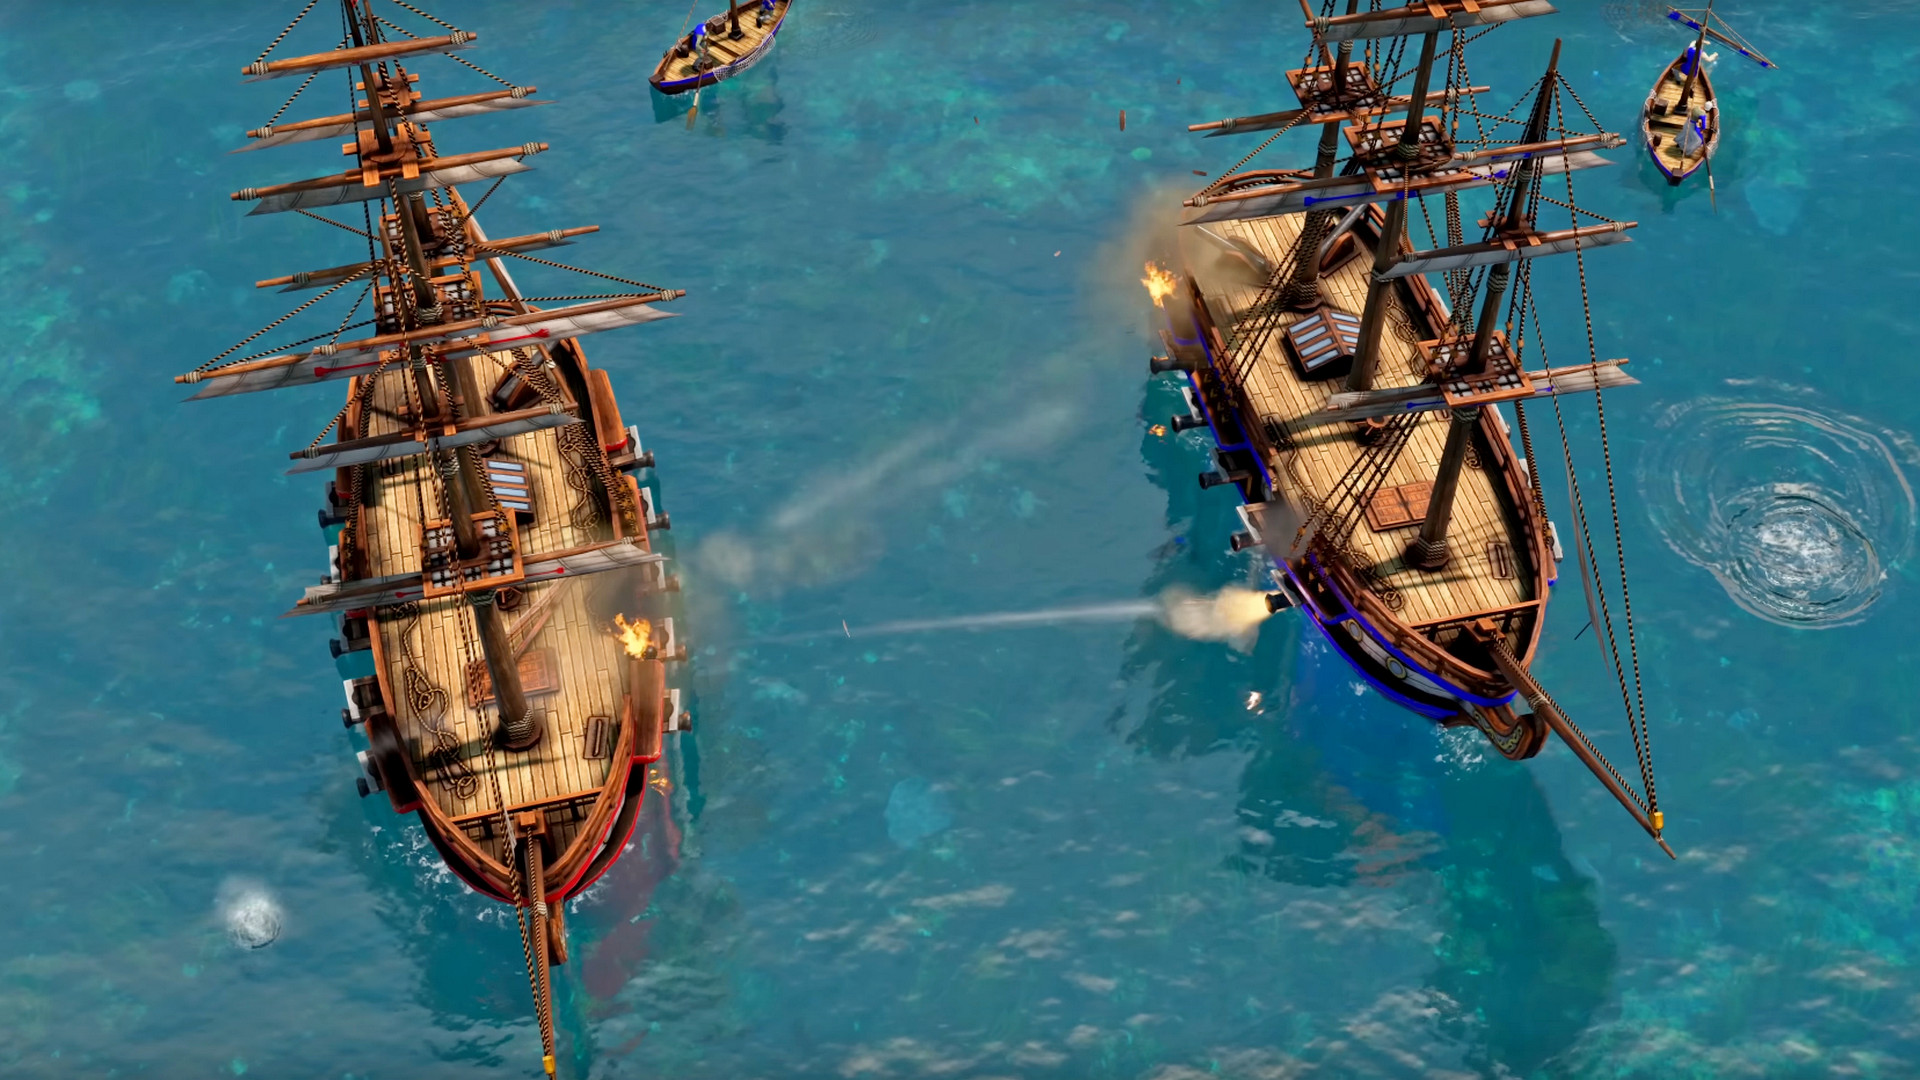 download aoe3 knights of the mediterranean